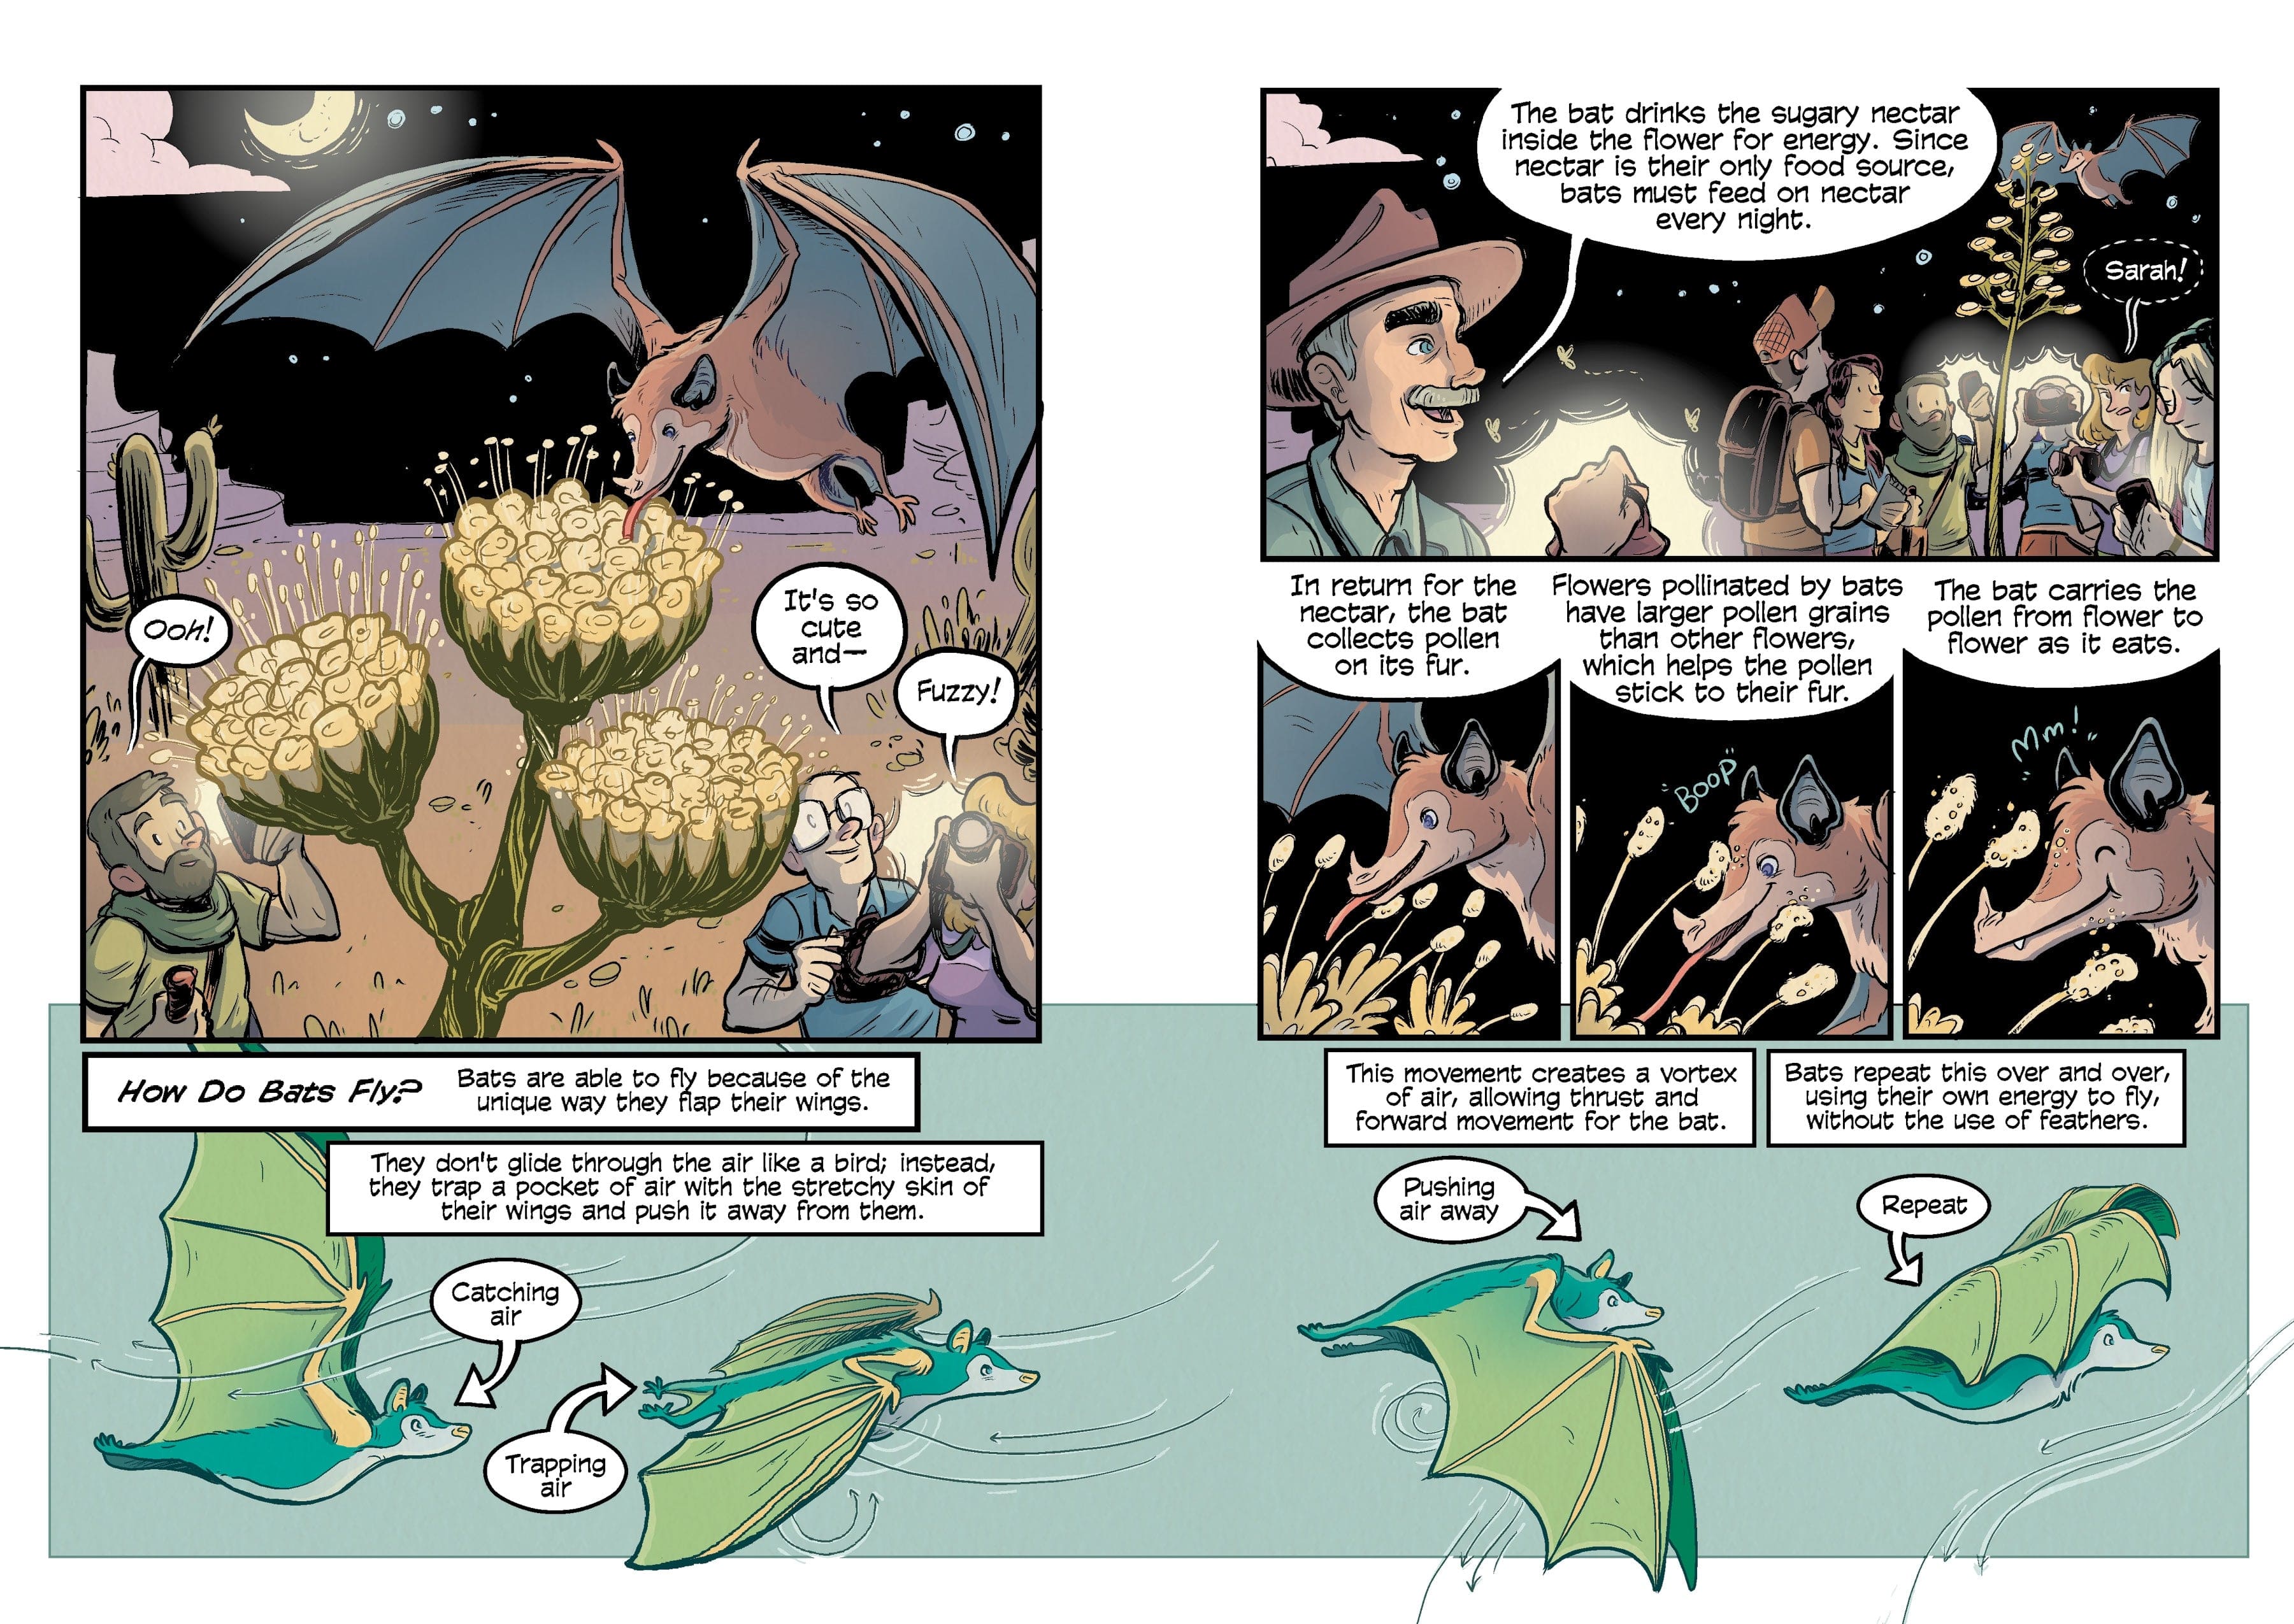 Science Comics - Bats Learning To Fly